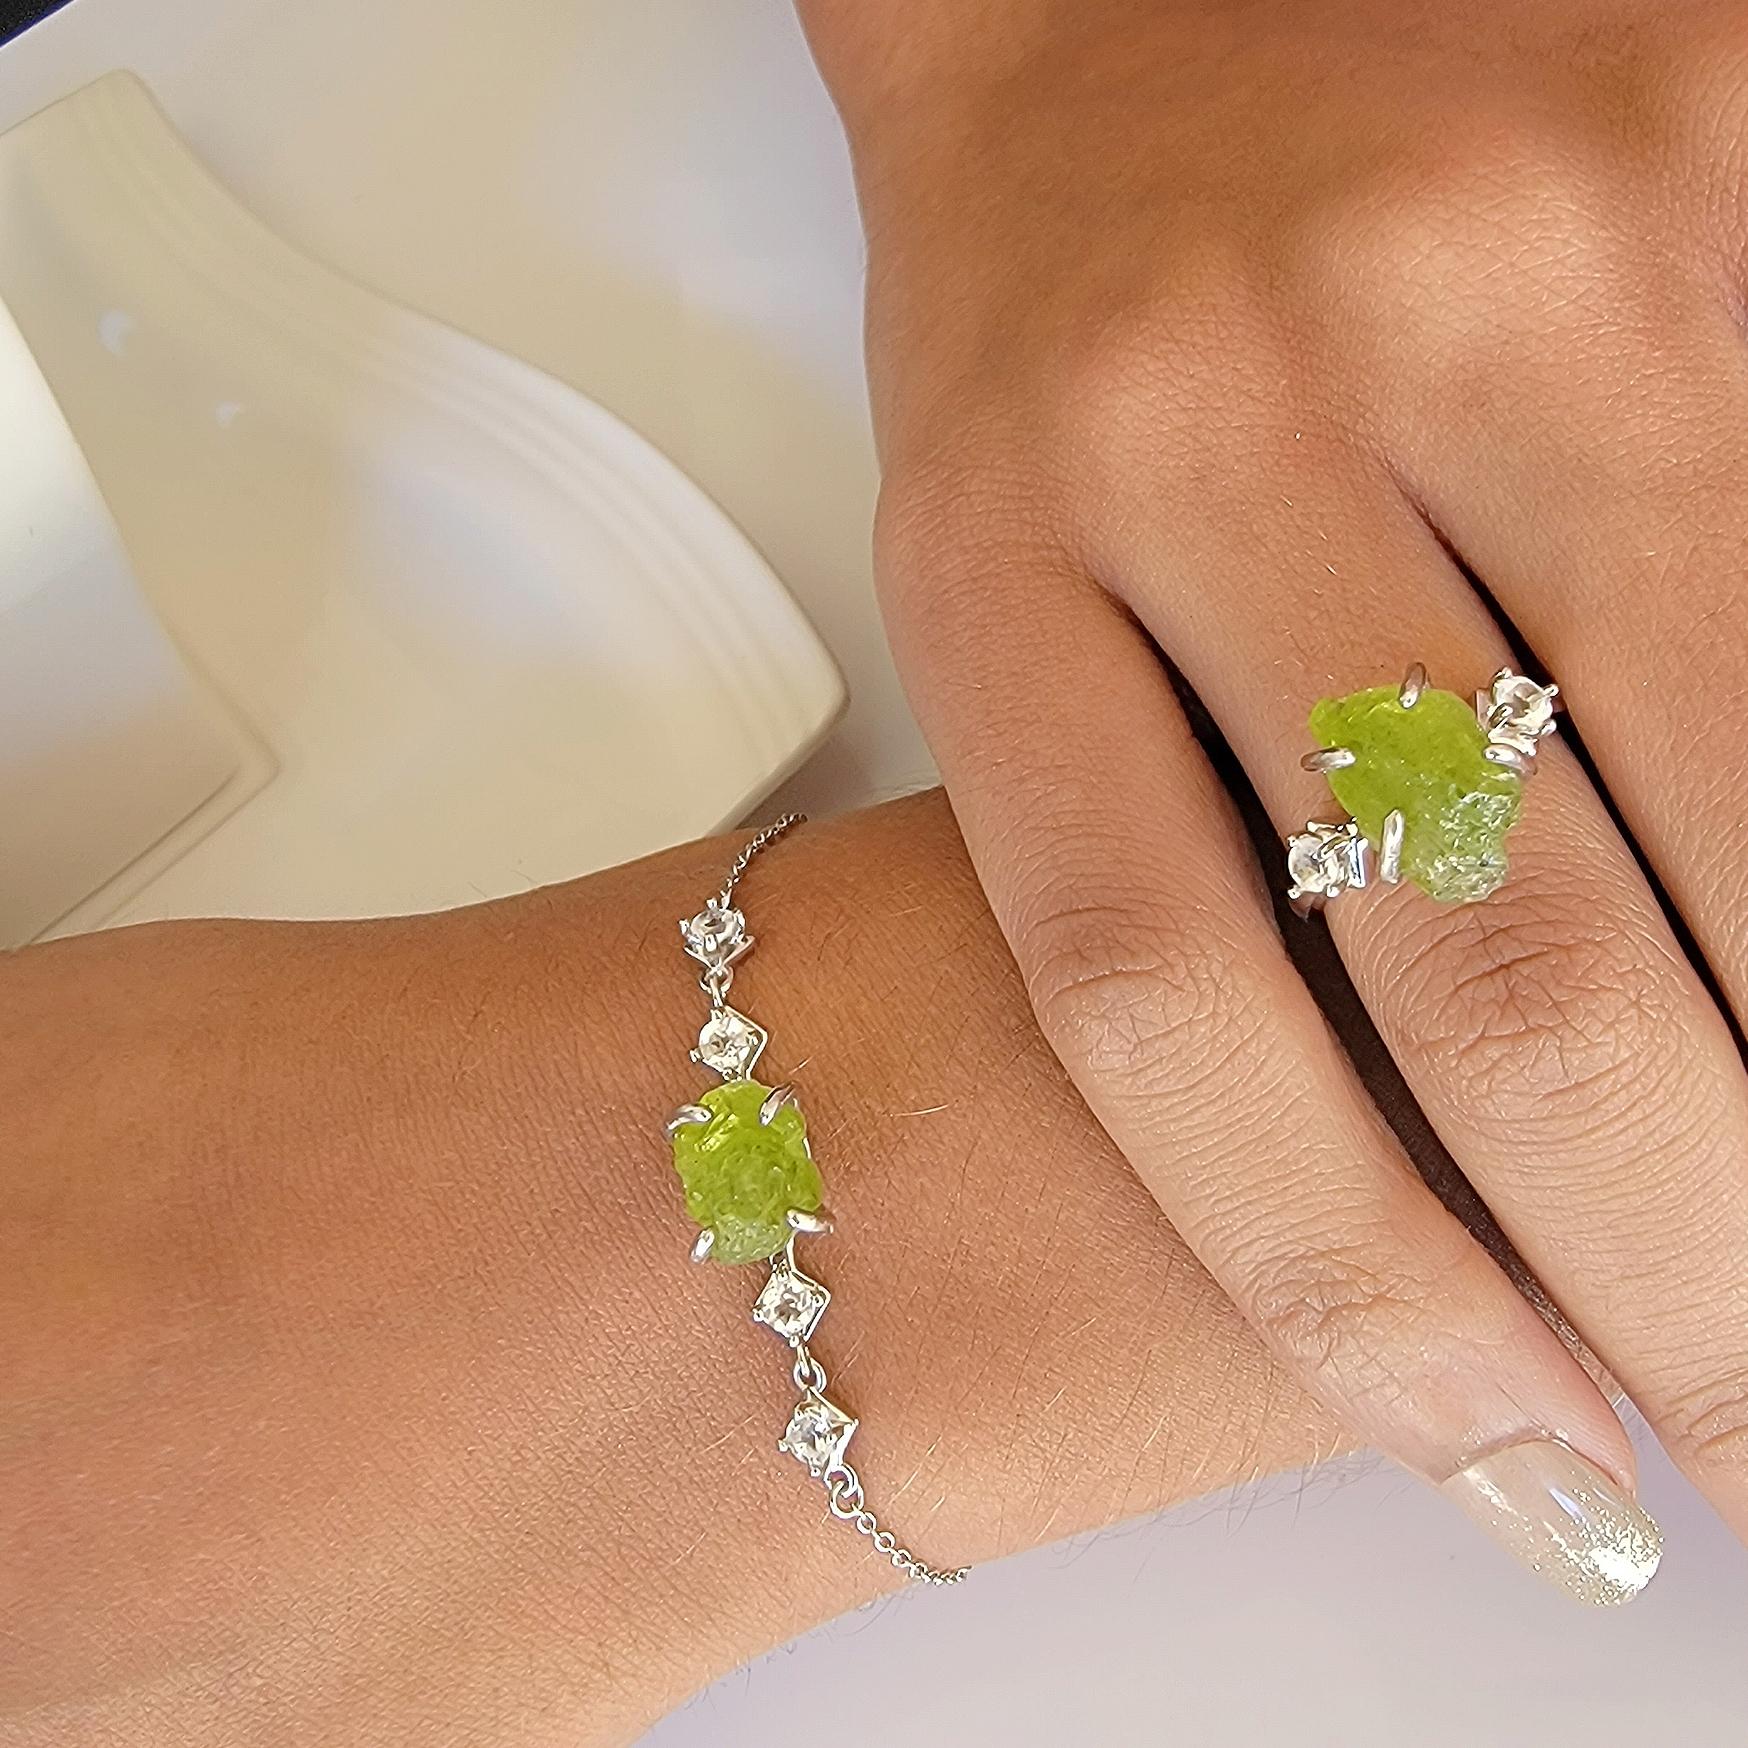 Get Peridot & Pearl Bracelet For Women: Unique Birthday Gift For August!